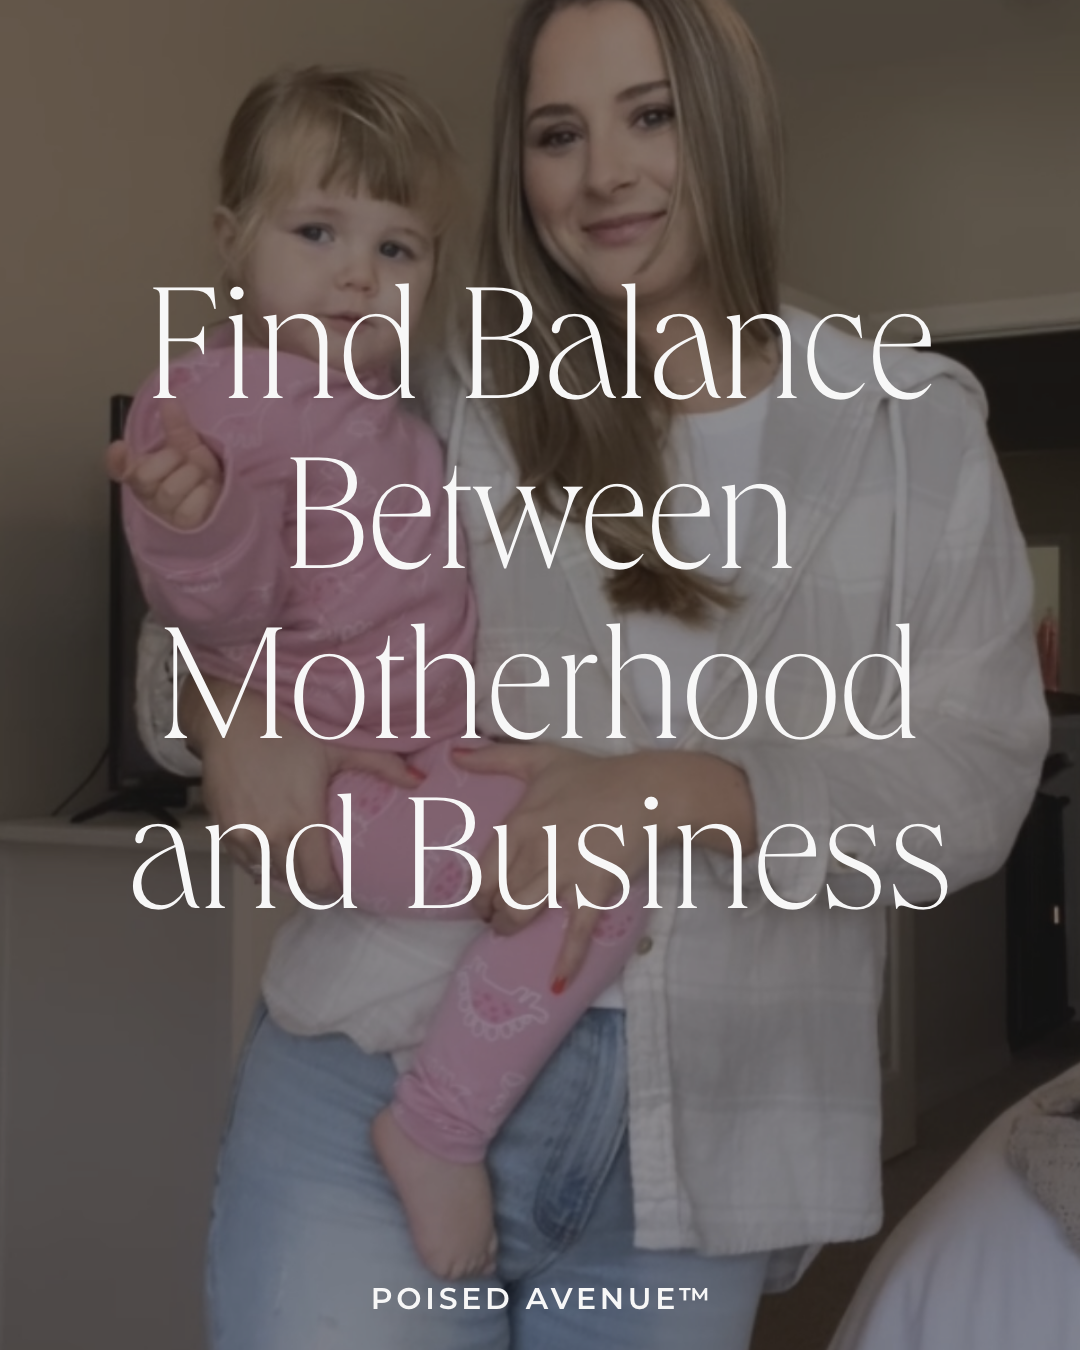 5 Tips for finding balance between motherhood and business by Amanda DeWoody, Temecula Valley brand designer and owner of Poised Avenue Design Studio